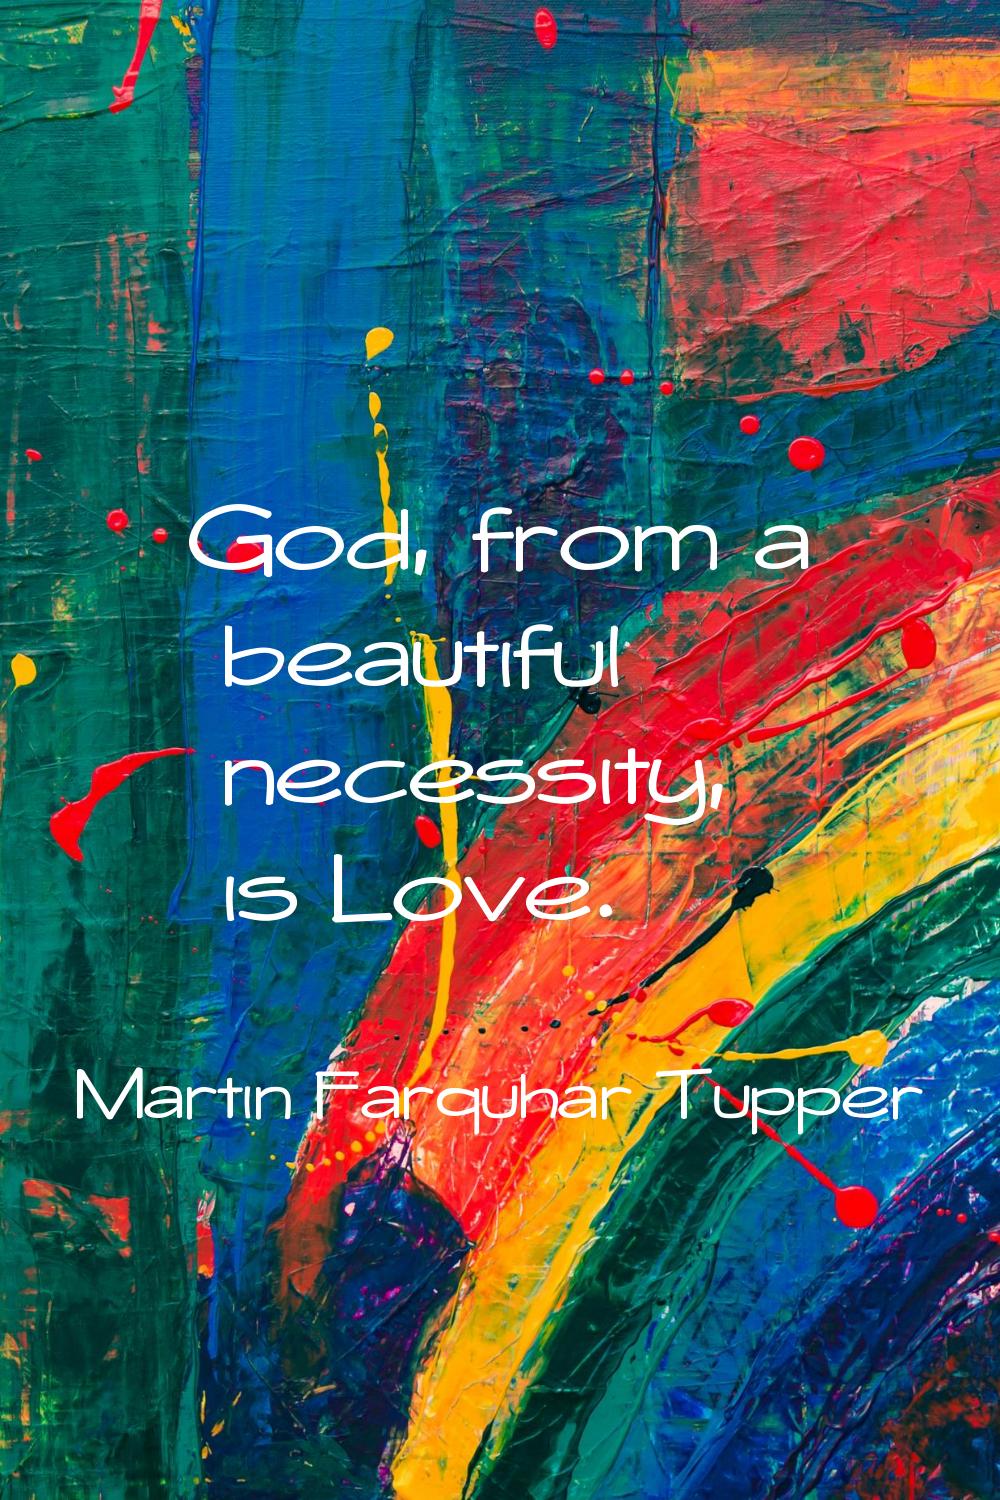 God, from a beautiful necessity, is Love.